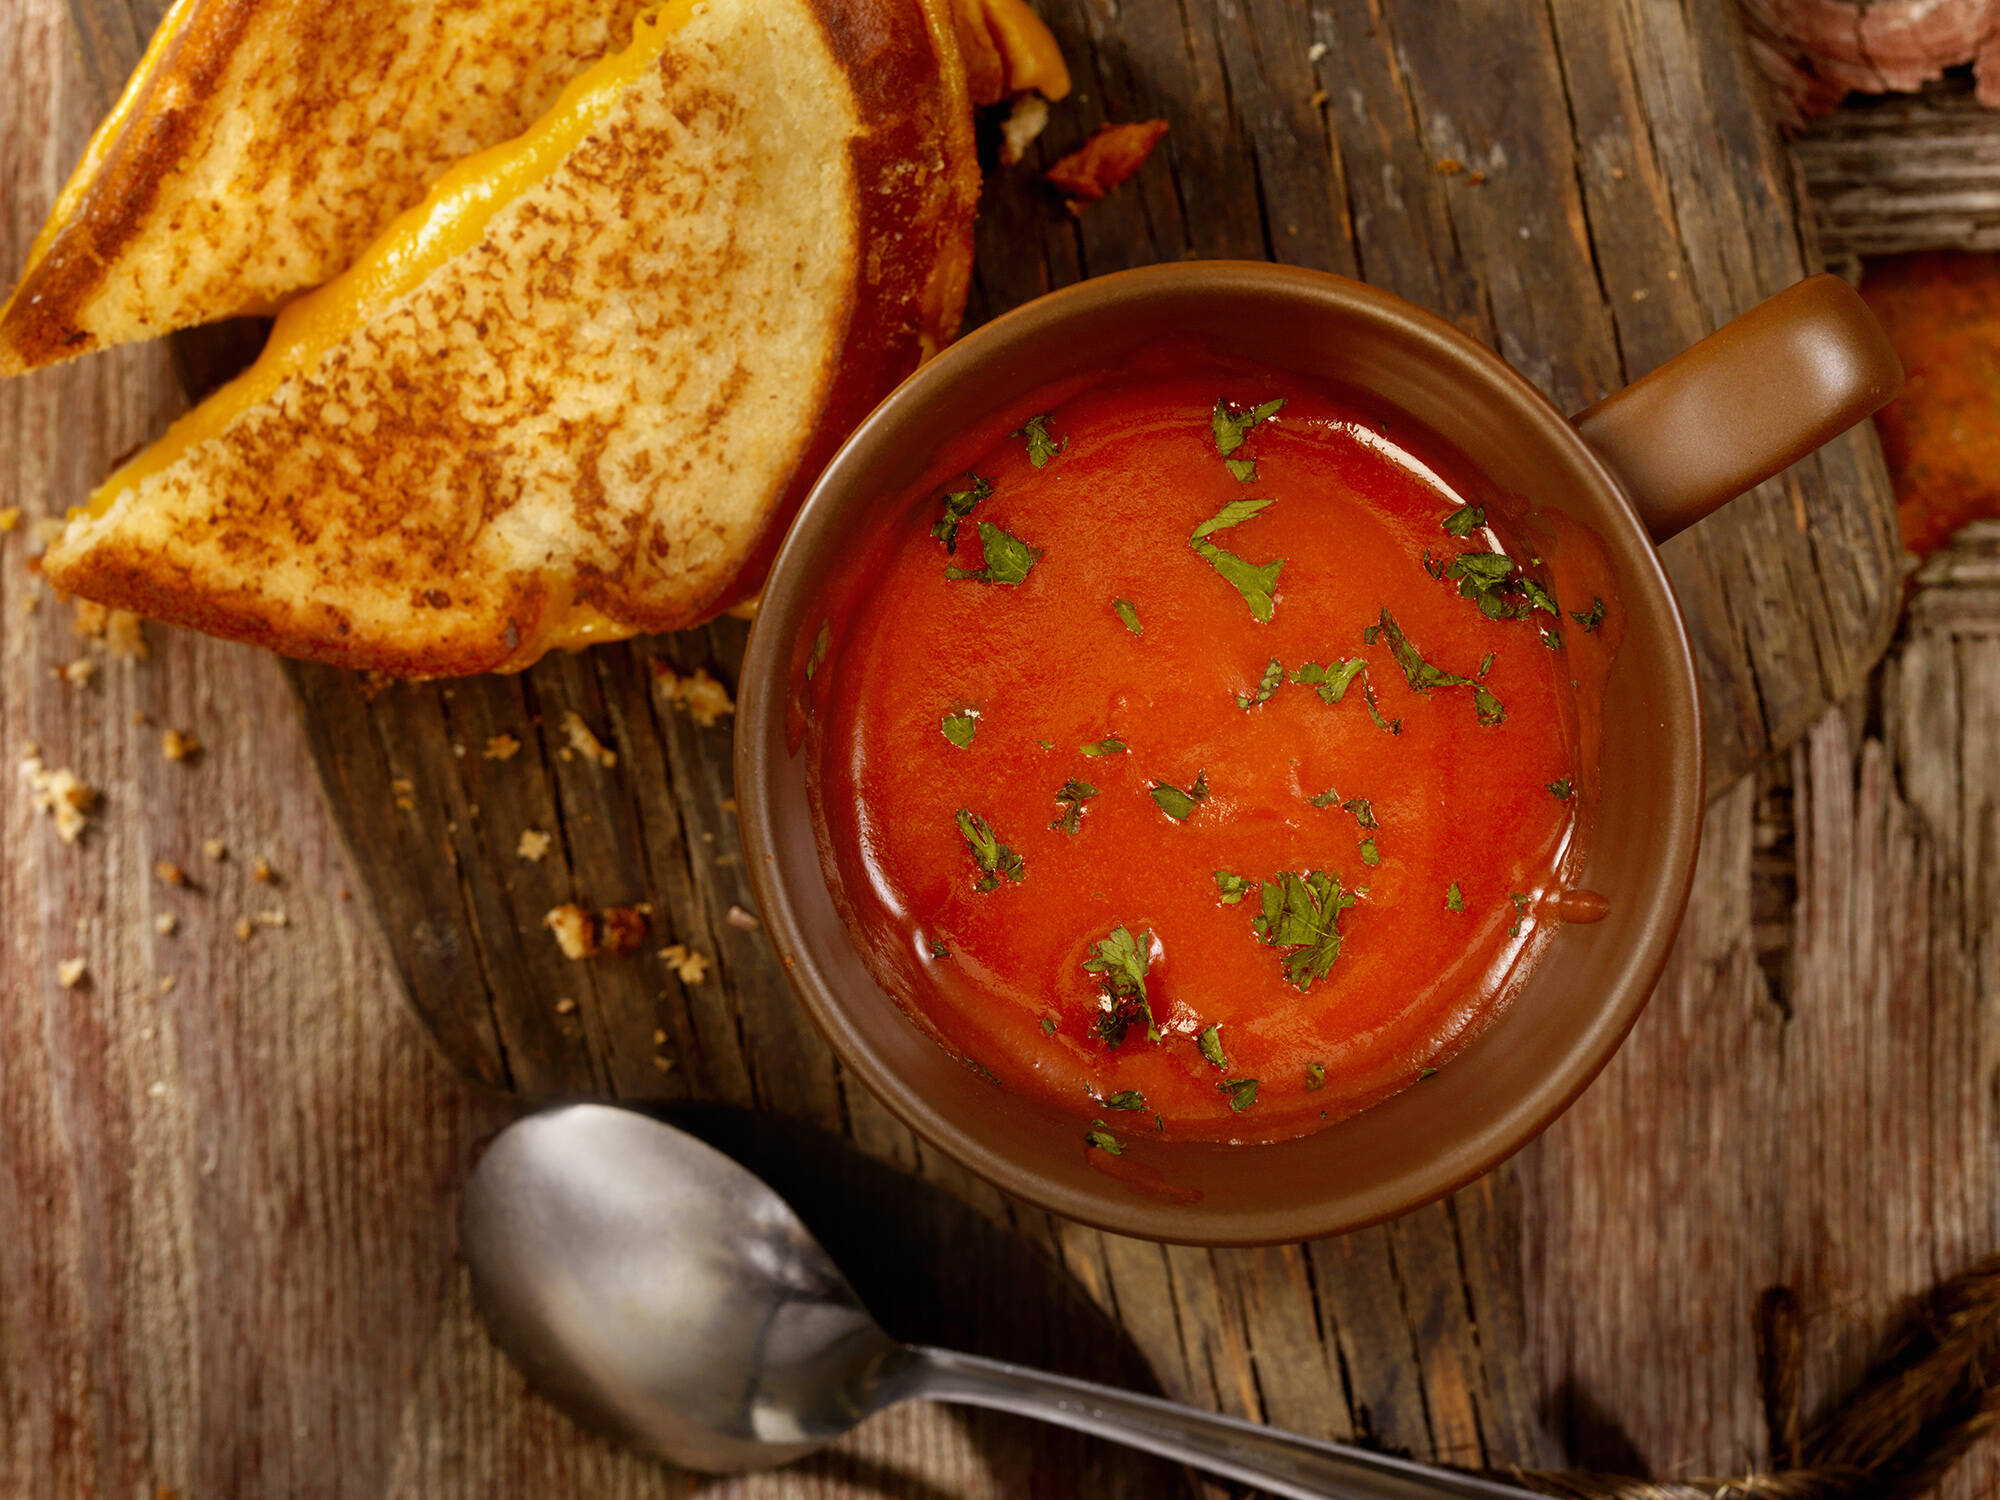 Tomato soup with a grilled cheese sandwich. (LauriPatterson via Getty Images)